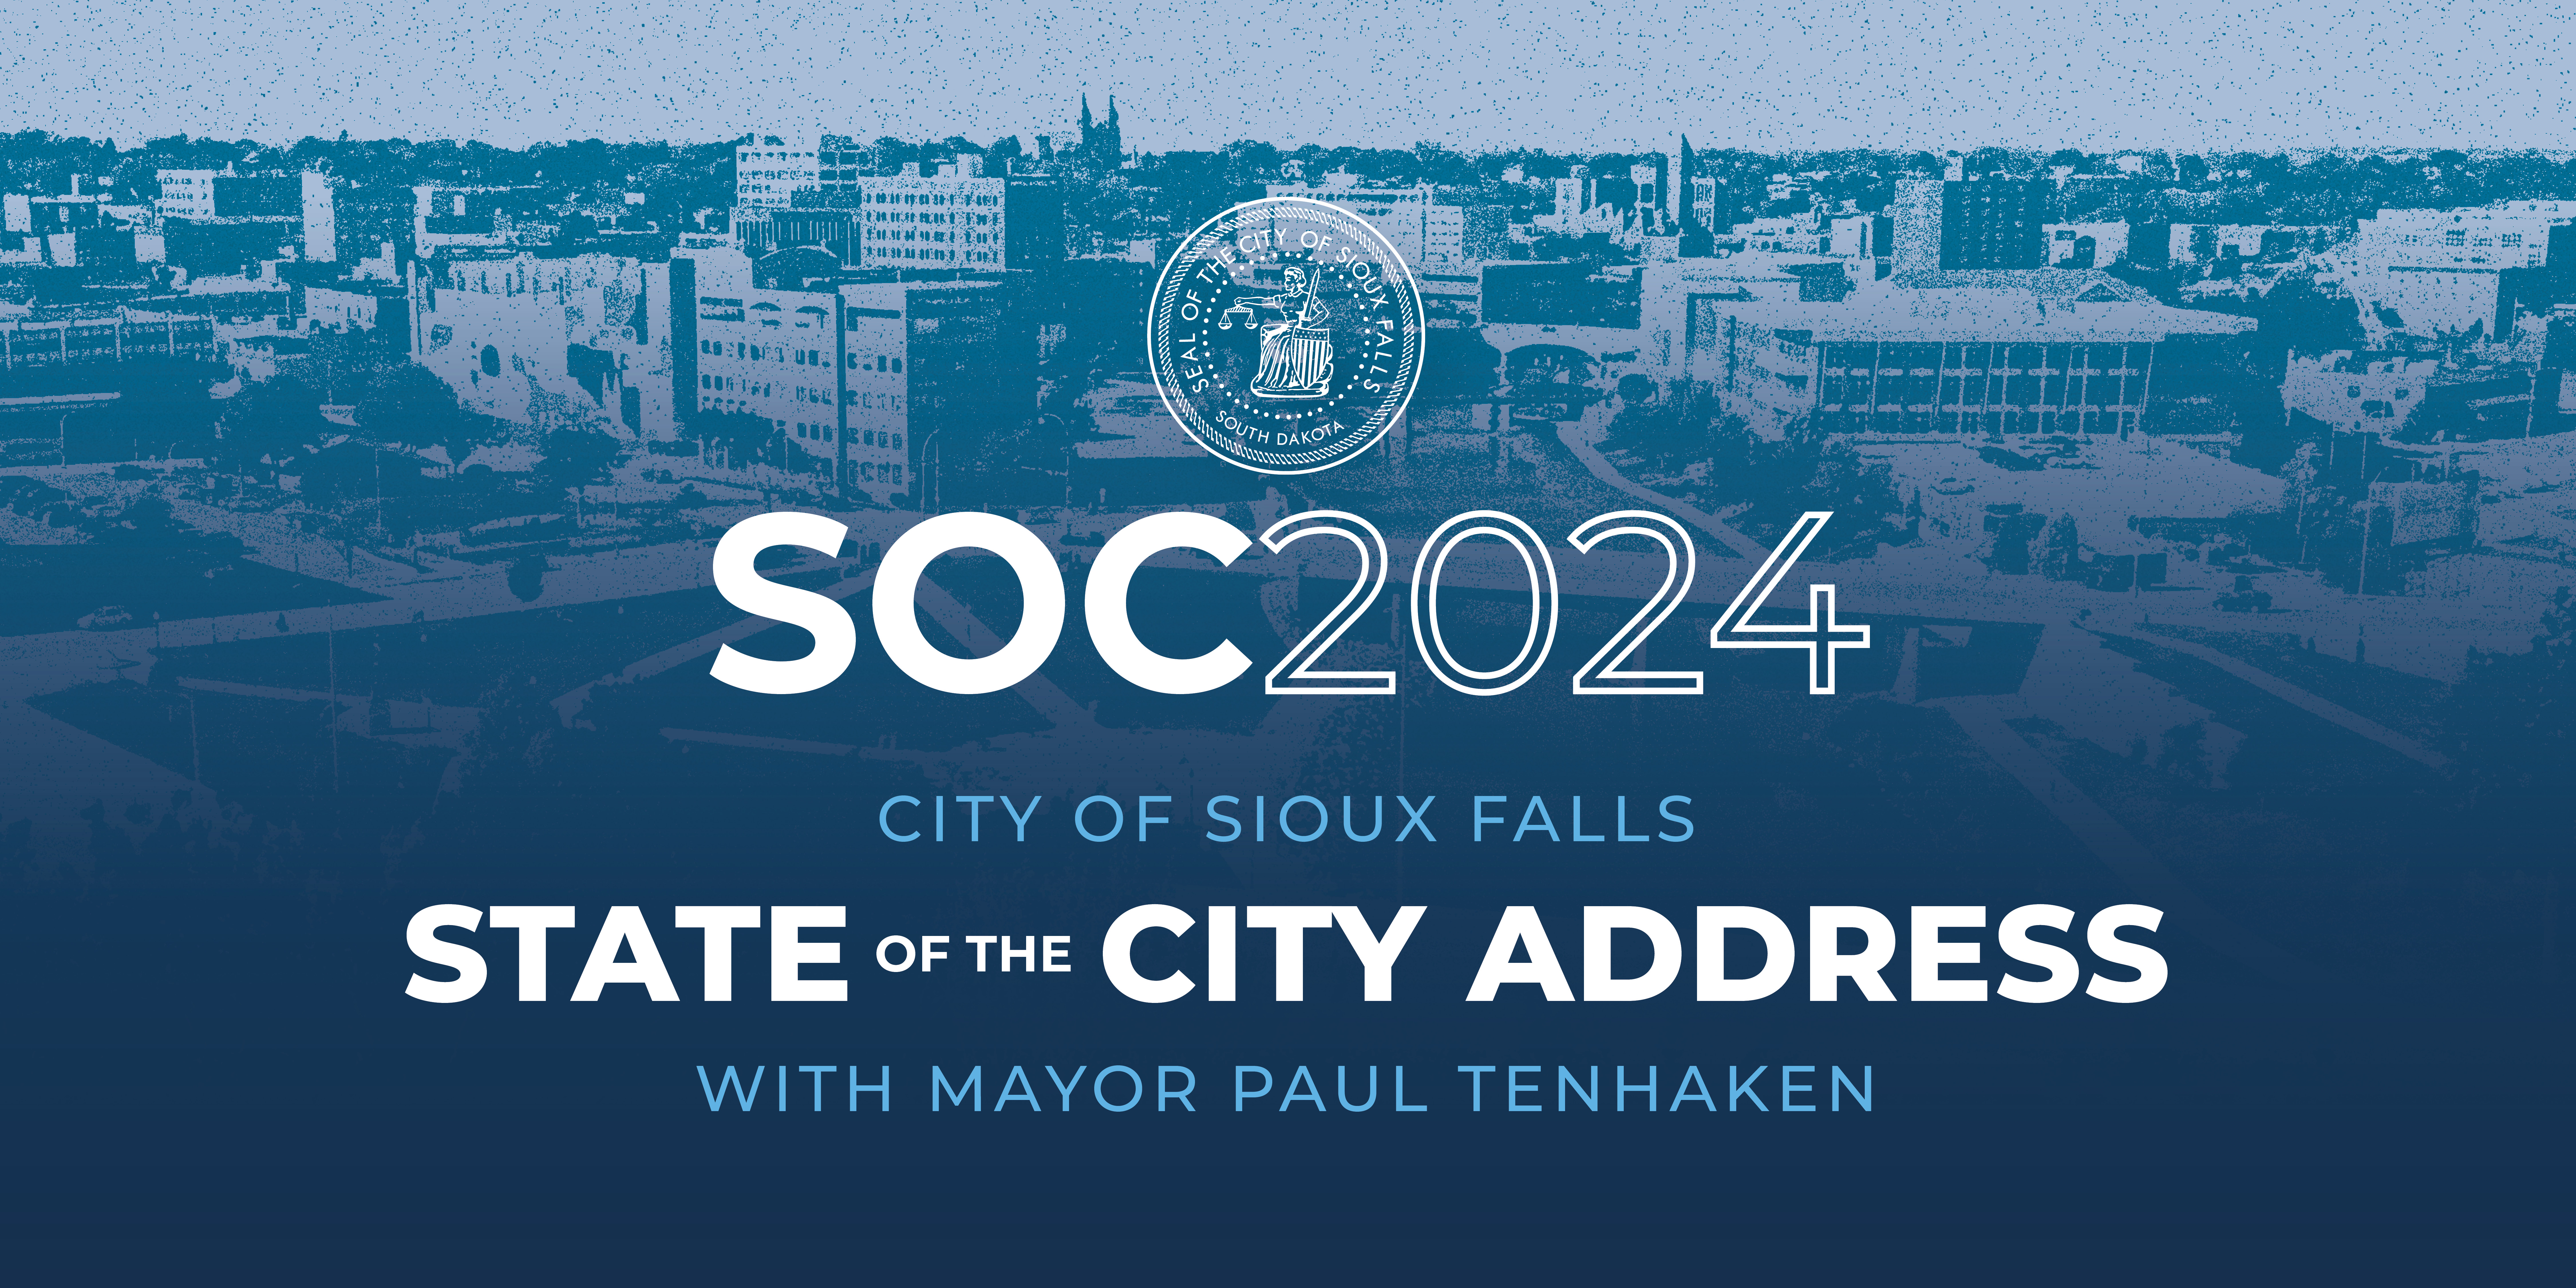 SOC 2024 City of Sioux Falls State of the City Address with Mayor Paul TenHaken